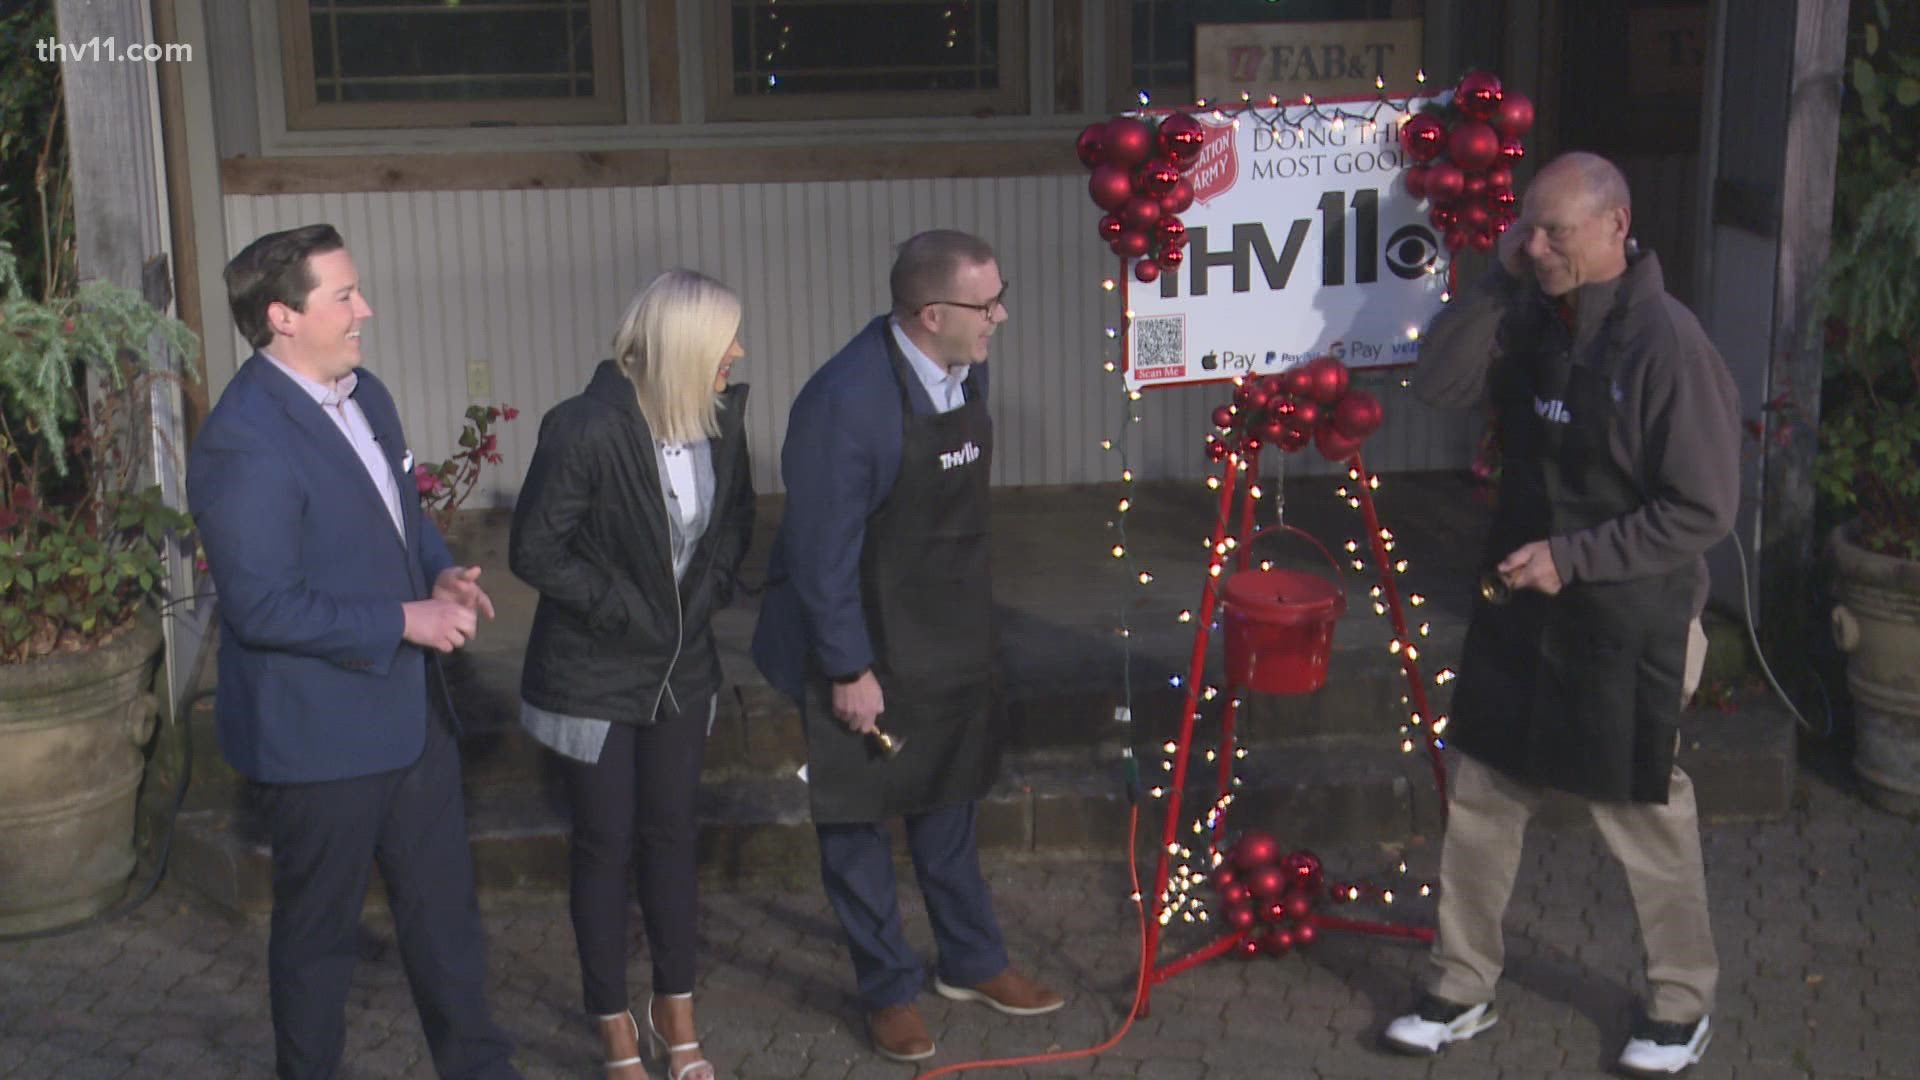 Longtime THV11 evening anchor Craig O'Neill surprises Meteorologist Skot Covert with the first-ever THV11 Traveling Kettle.